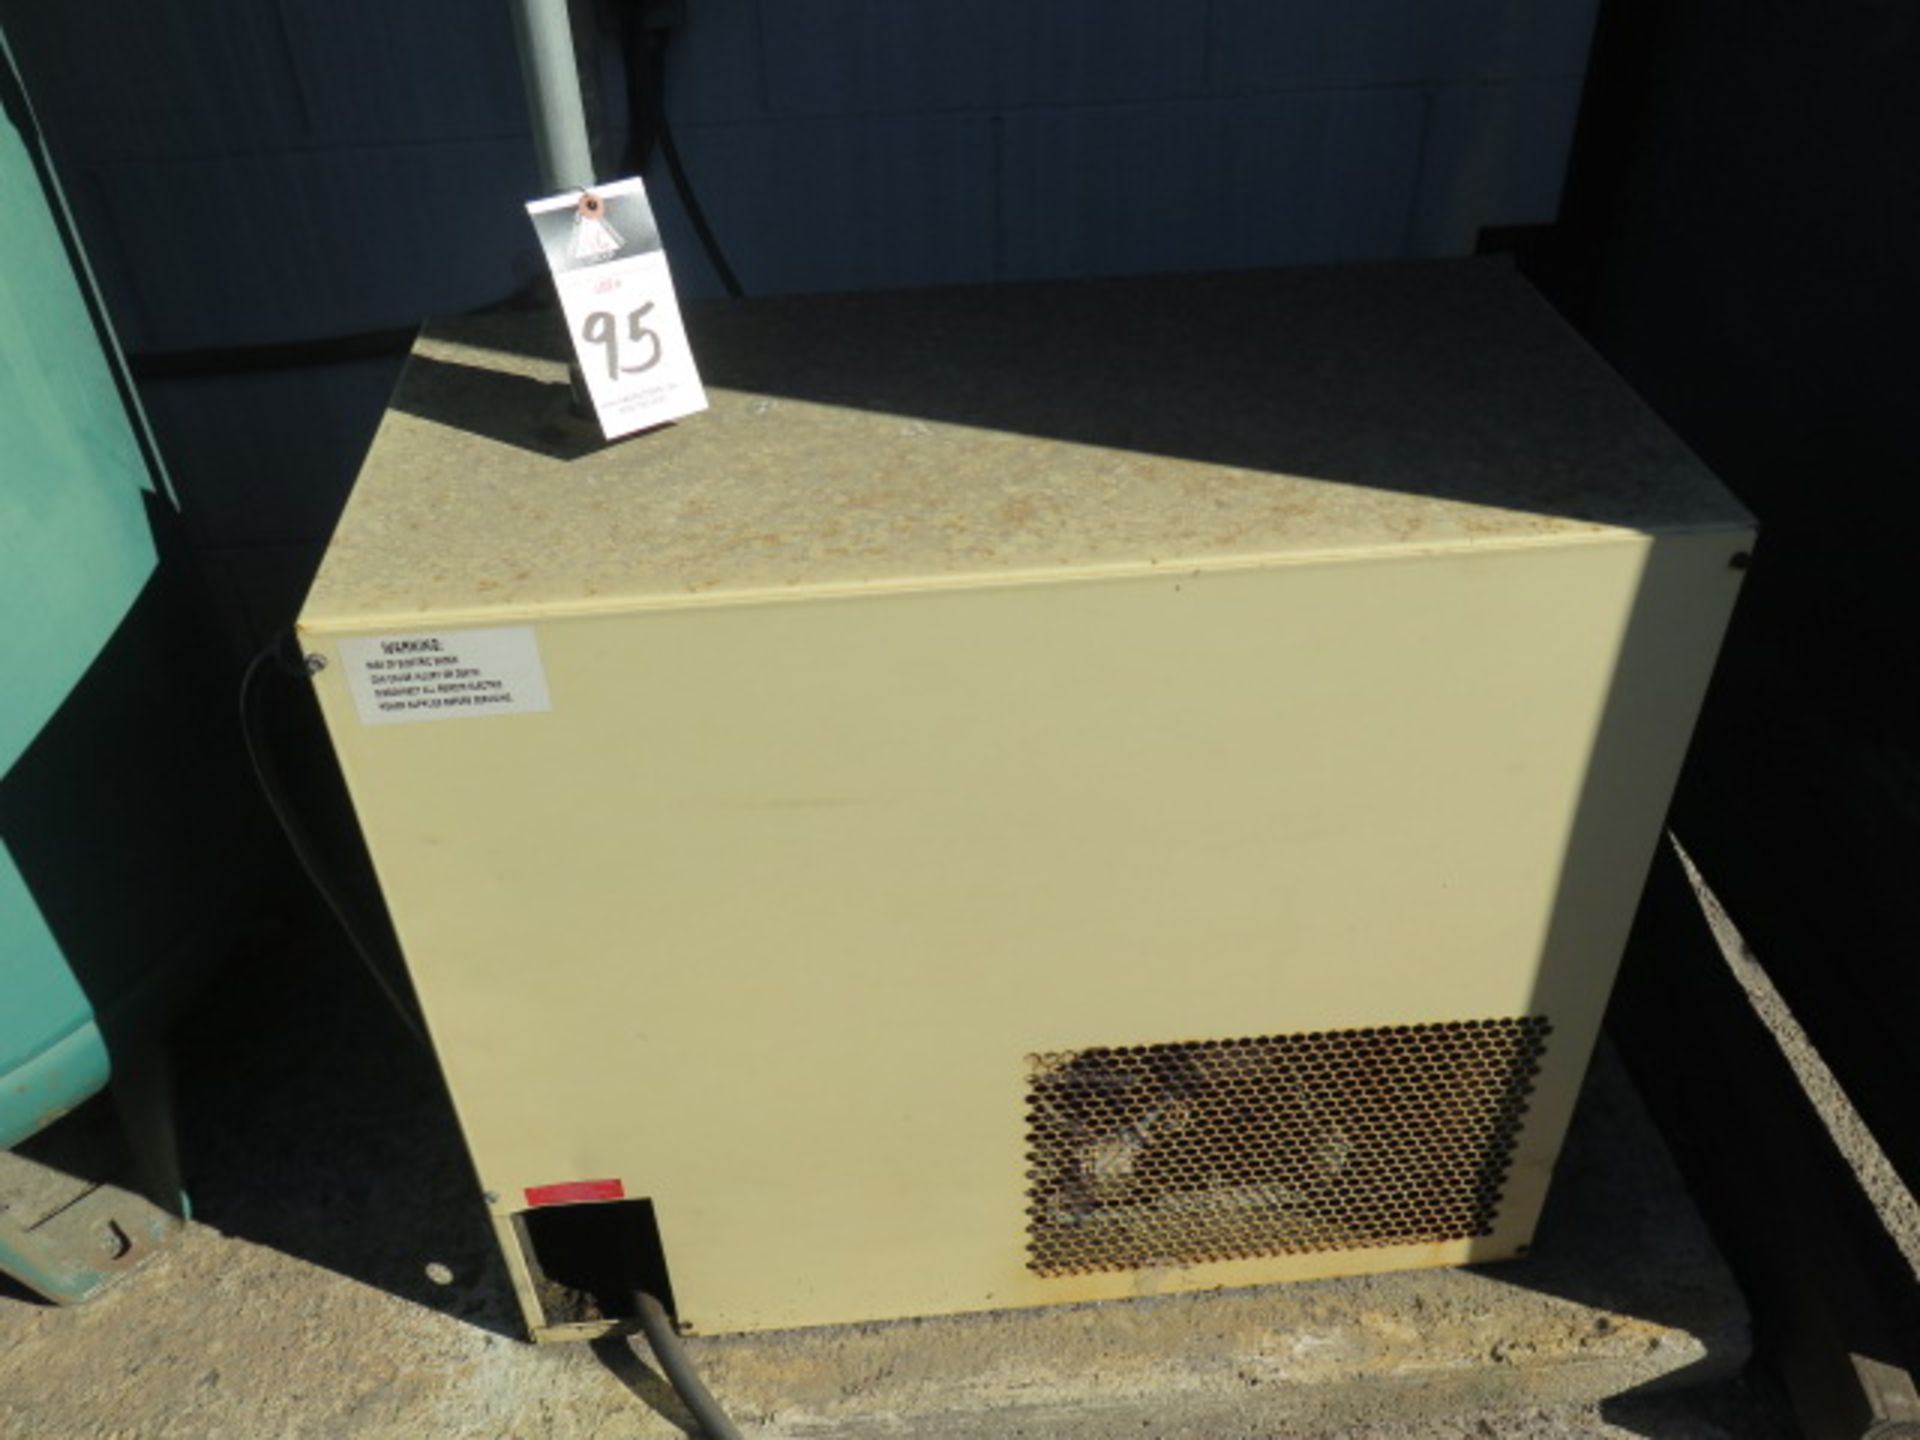 Ingersoll Rand mdl. DS75-42493544-115/1/60 Refrigerated Air Dryer s/n 2670030010